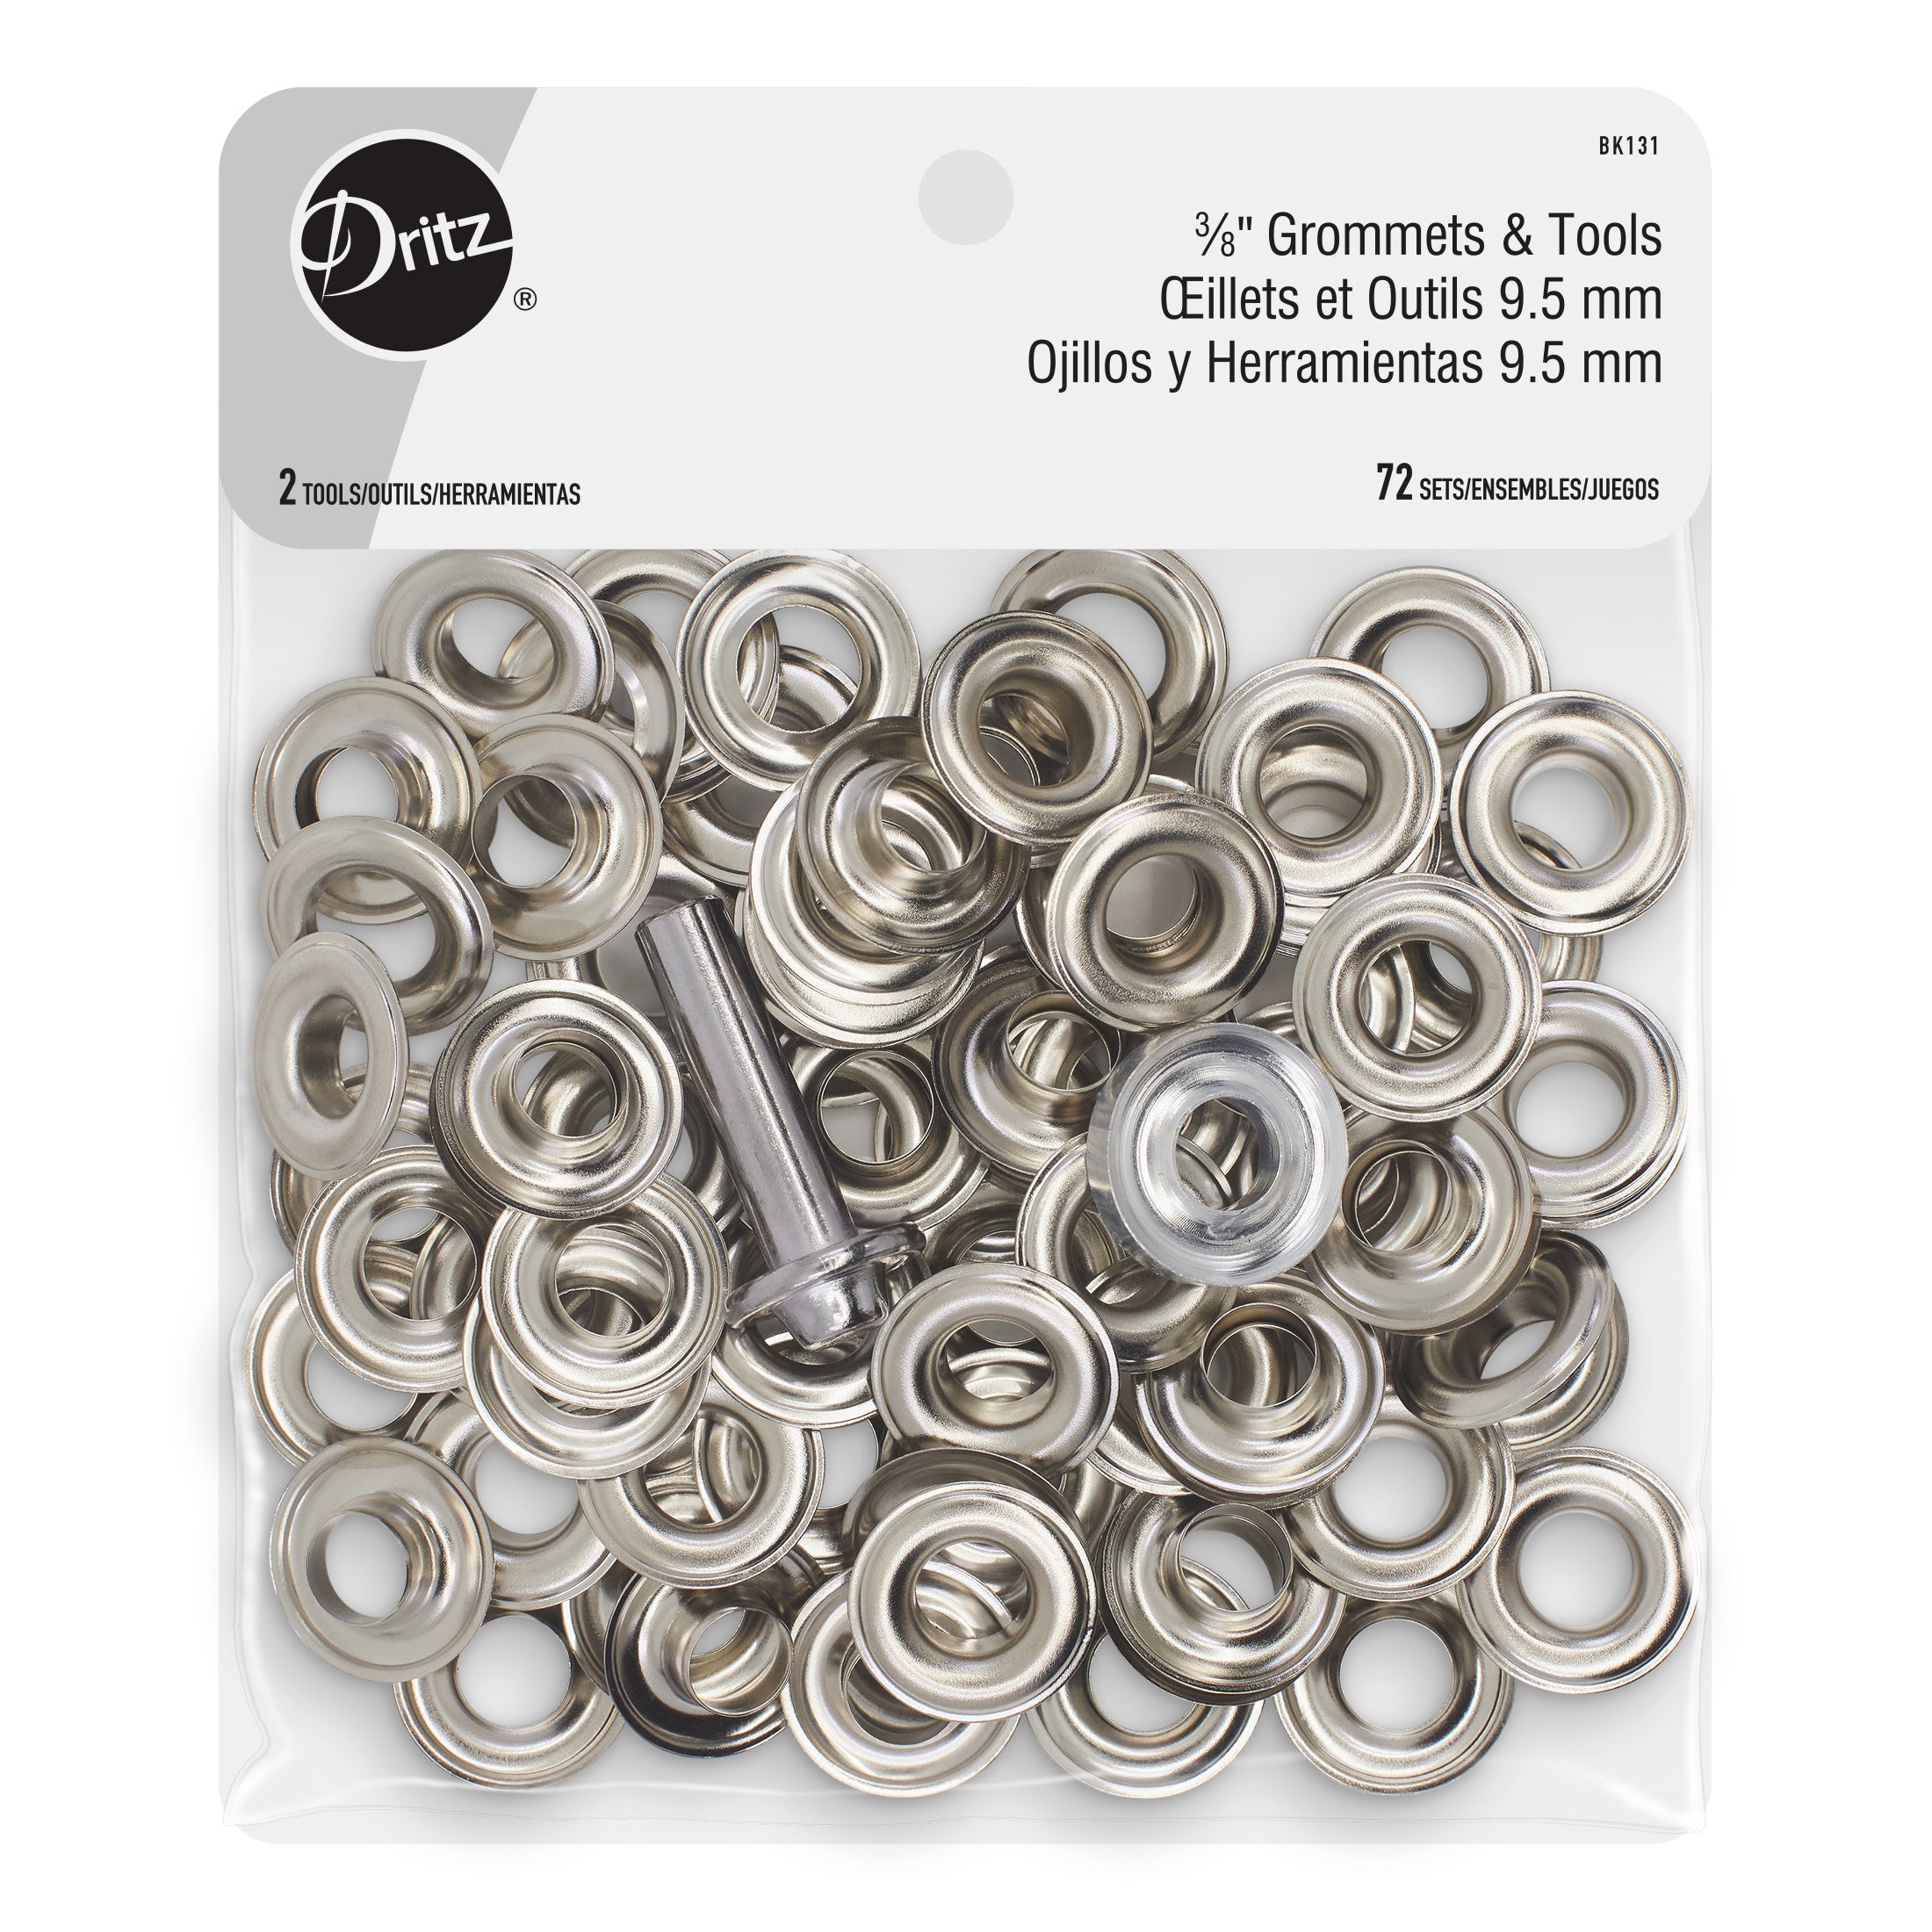 Dritz Sew-On Snaps, 72 Sets, Size 1, Nickel